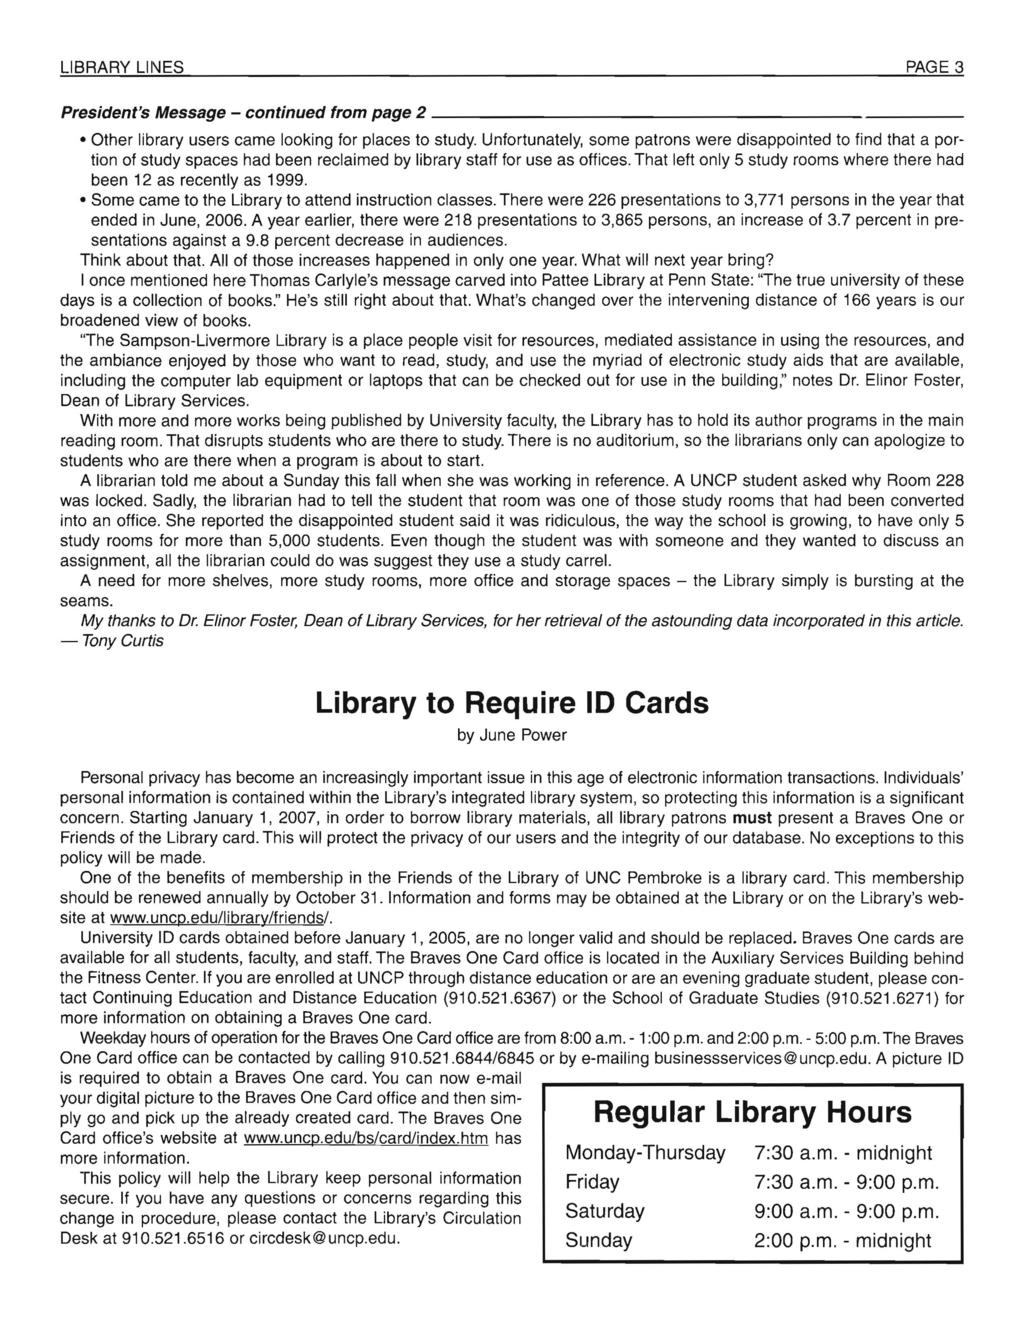 LIBRARY LINES PAGE 3 President's Message - continued from page 2 Other library users came looking for places to study.